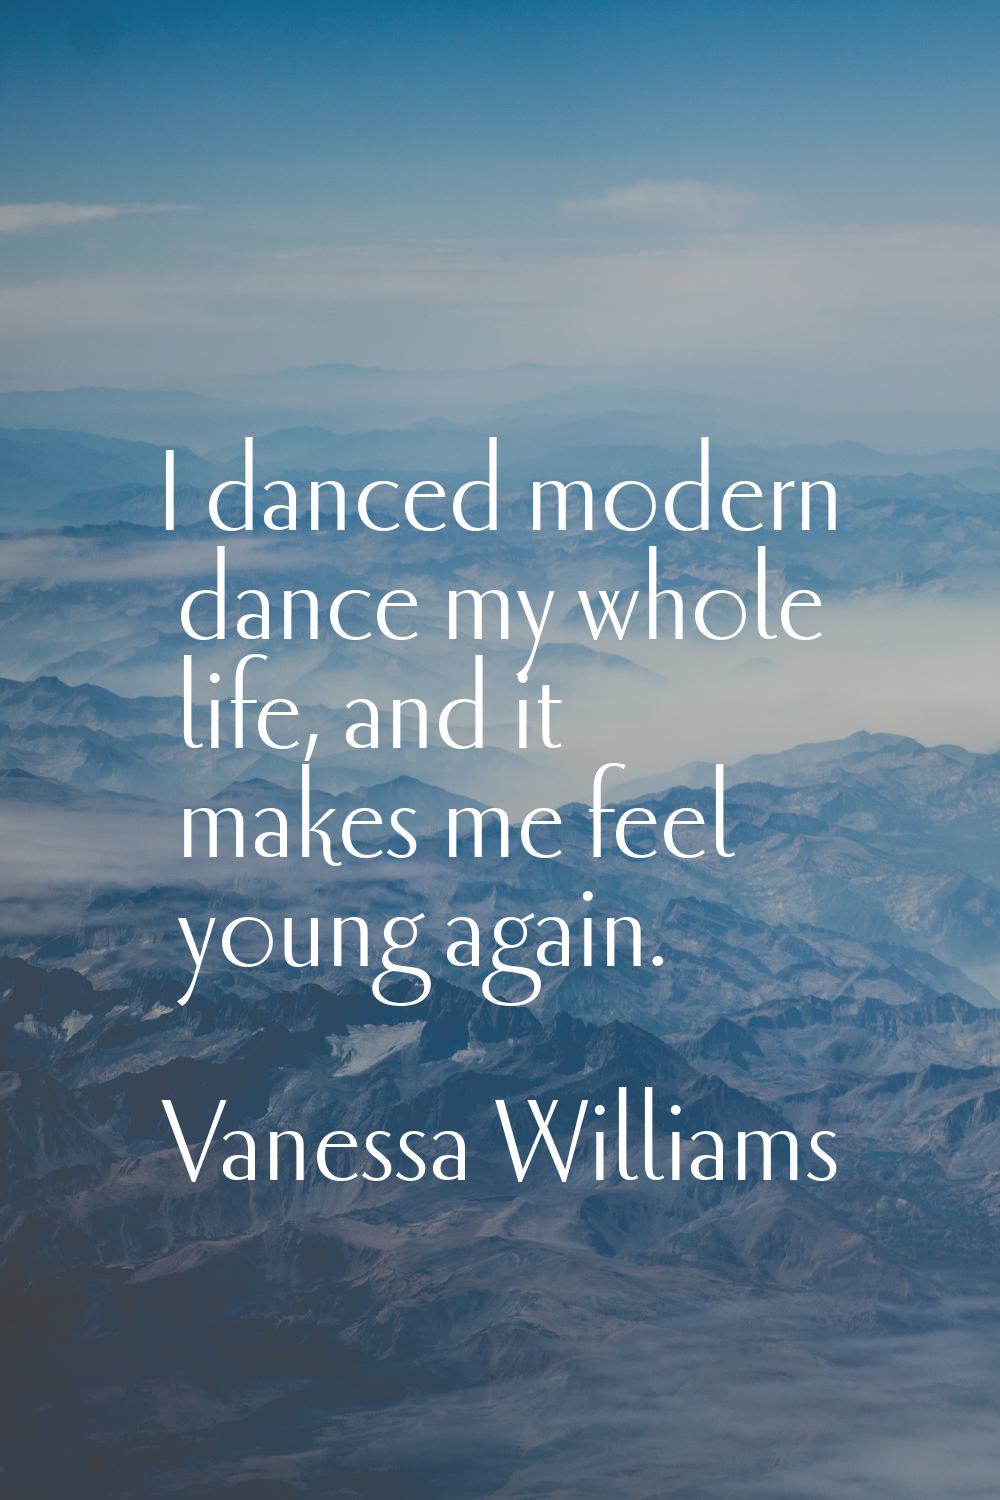 I danced modern dance my whole life, and it makes me feel young again.